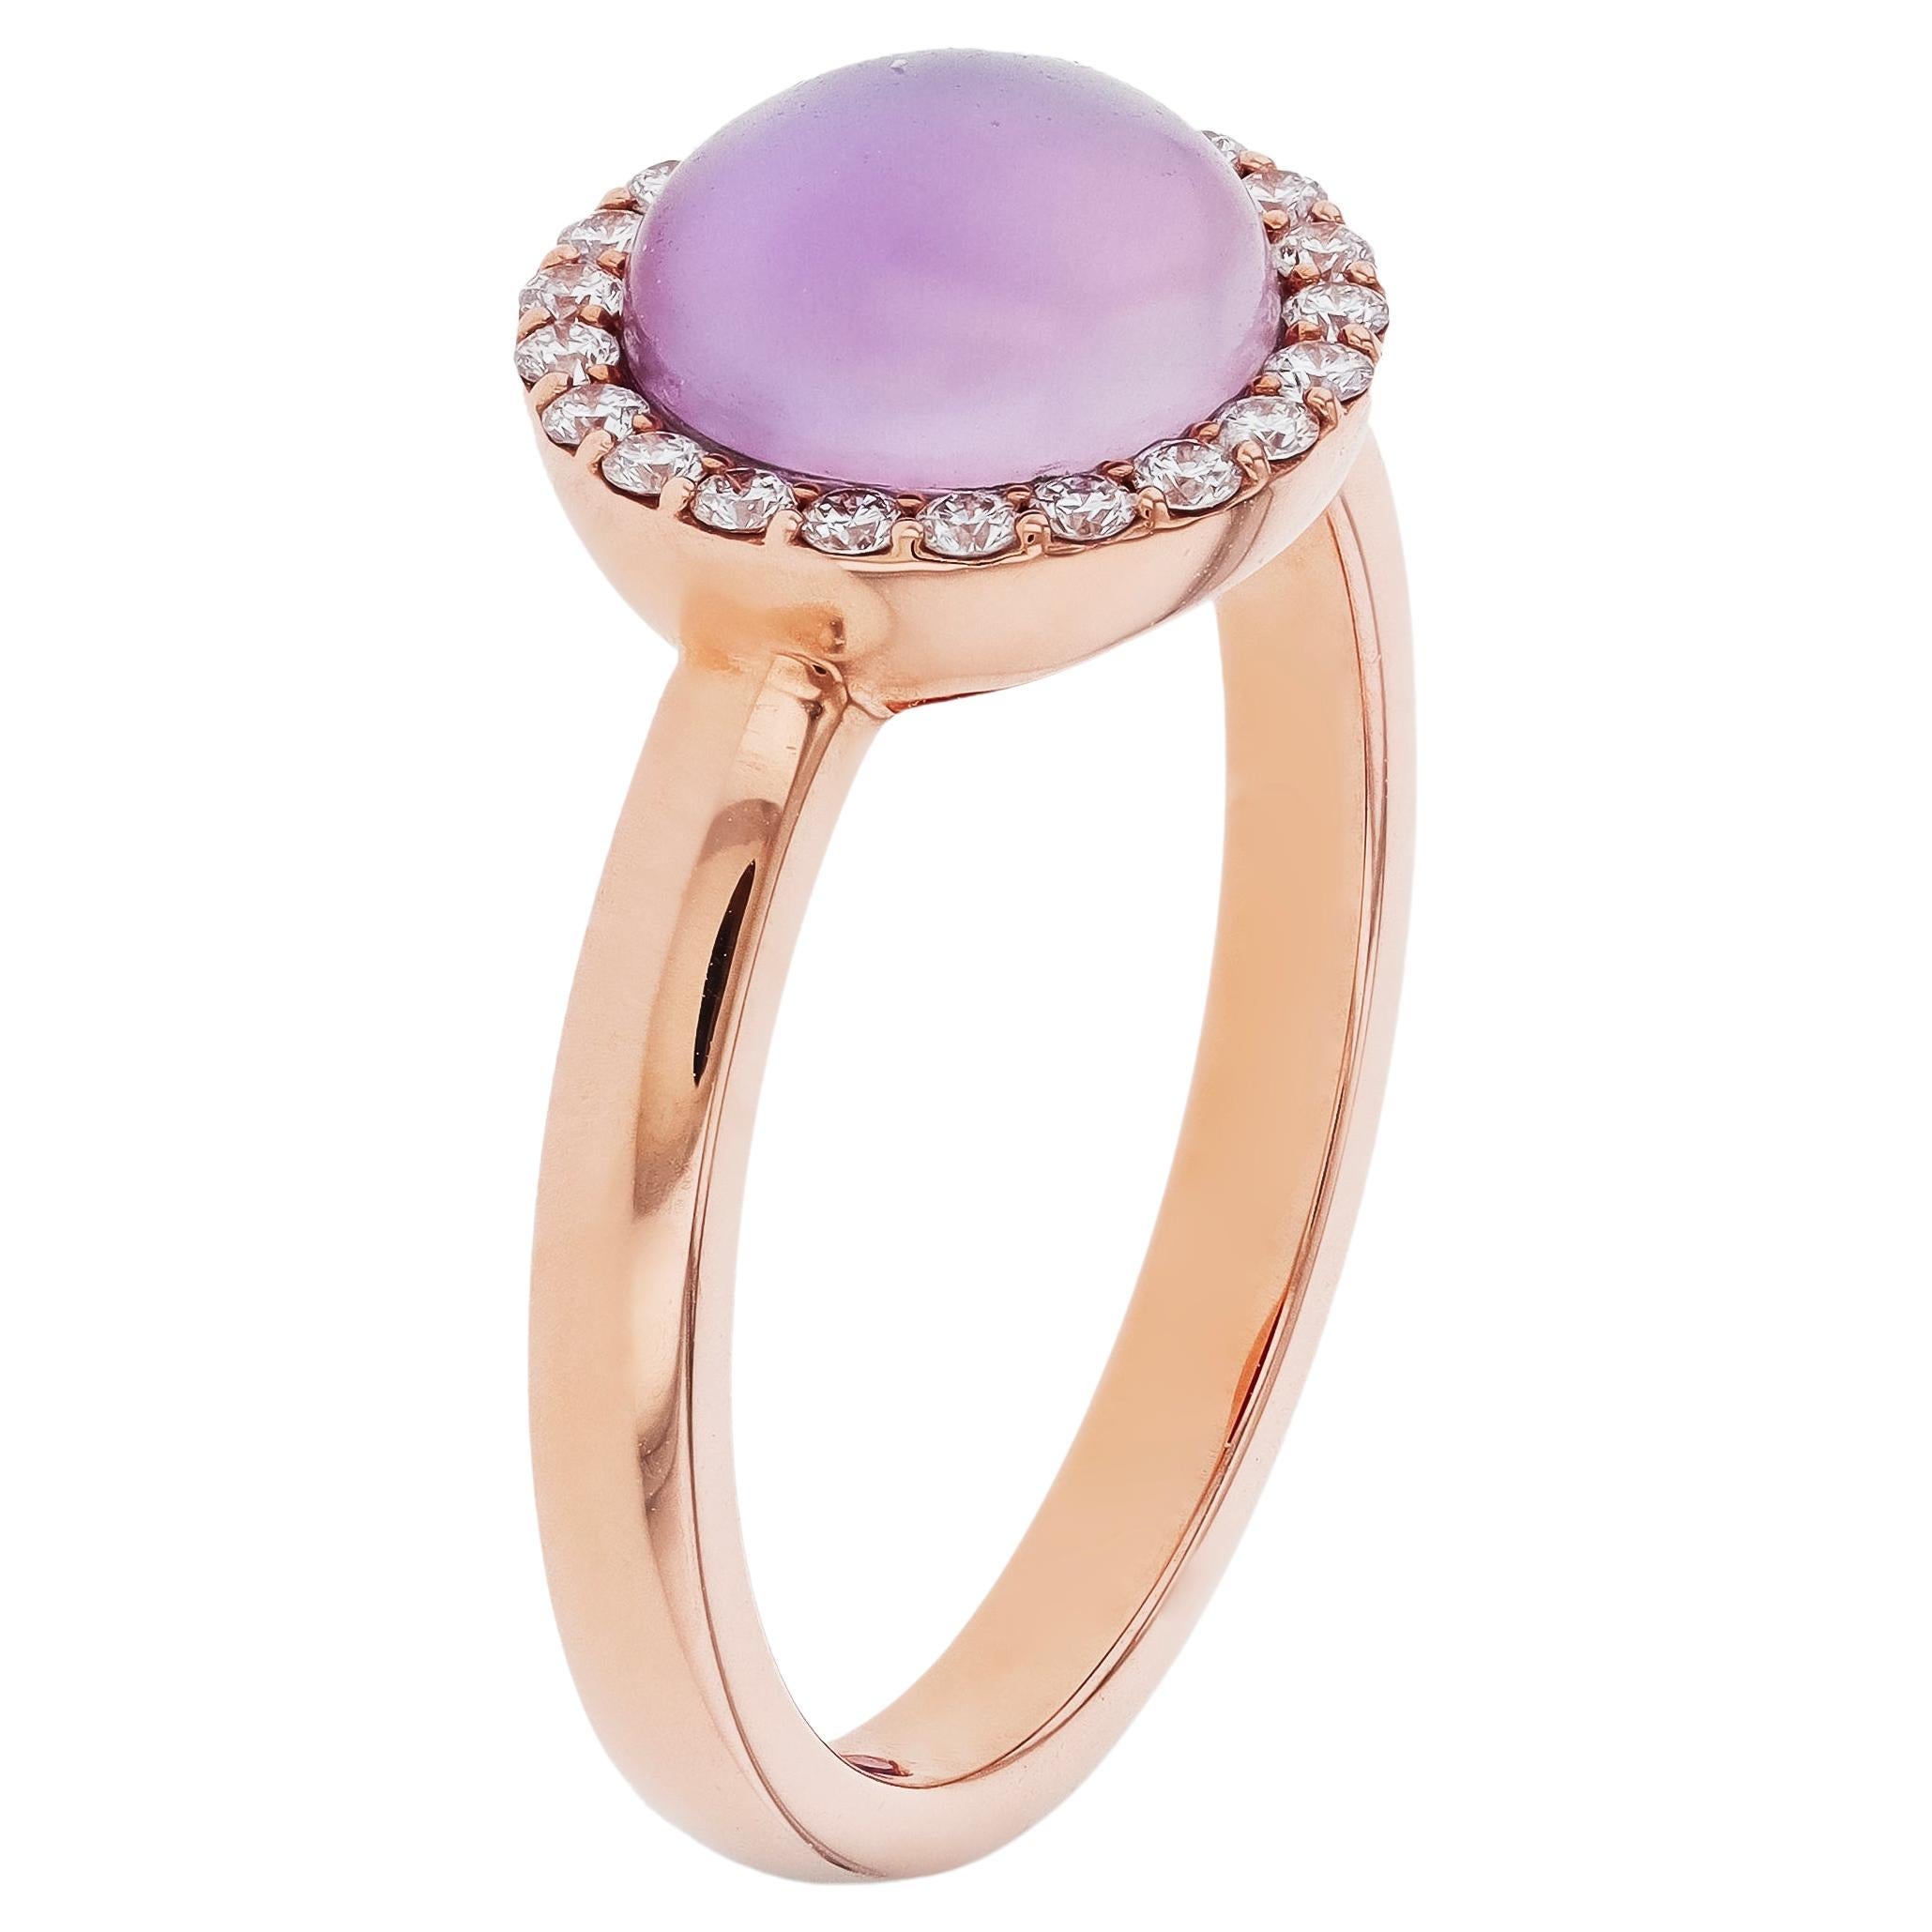 Roberto Coin 18K Rose Gold, Amethyst and Diamond Halo Ring sz 6.5 For Sale